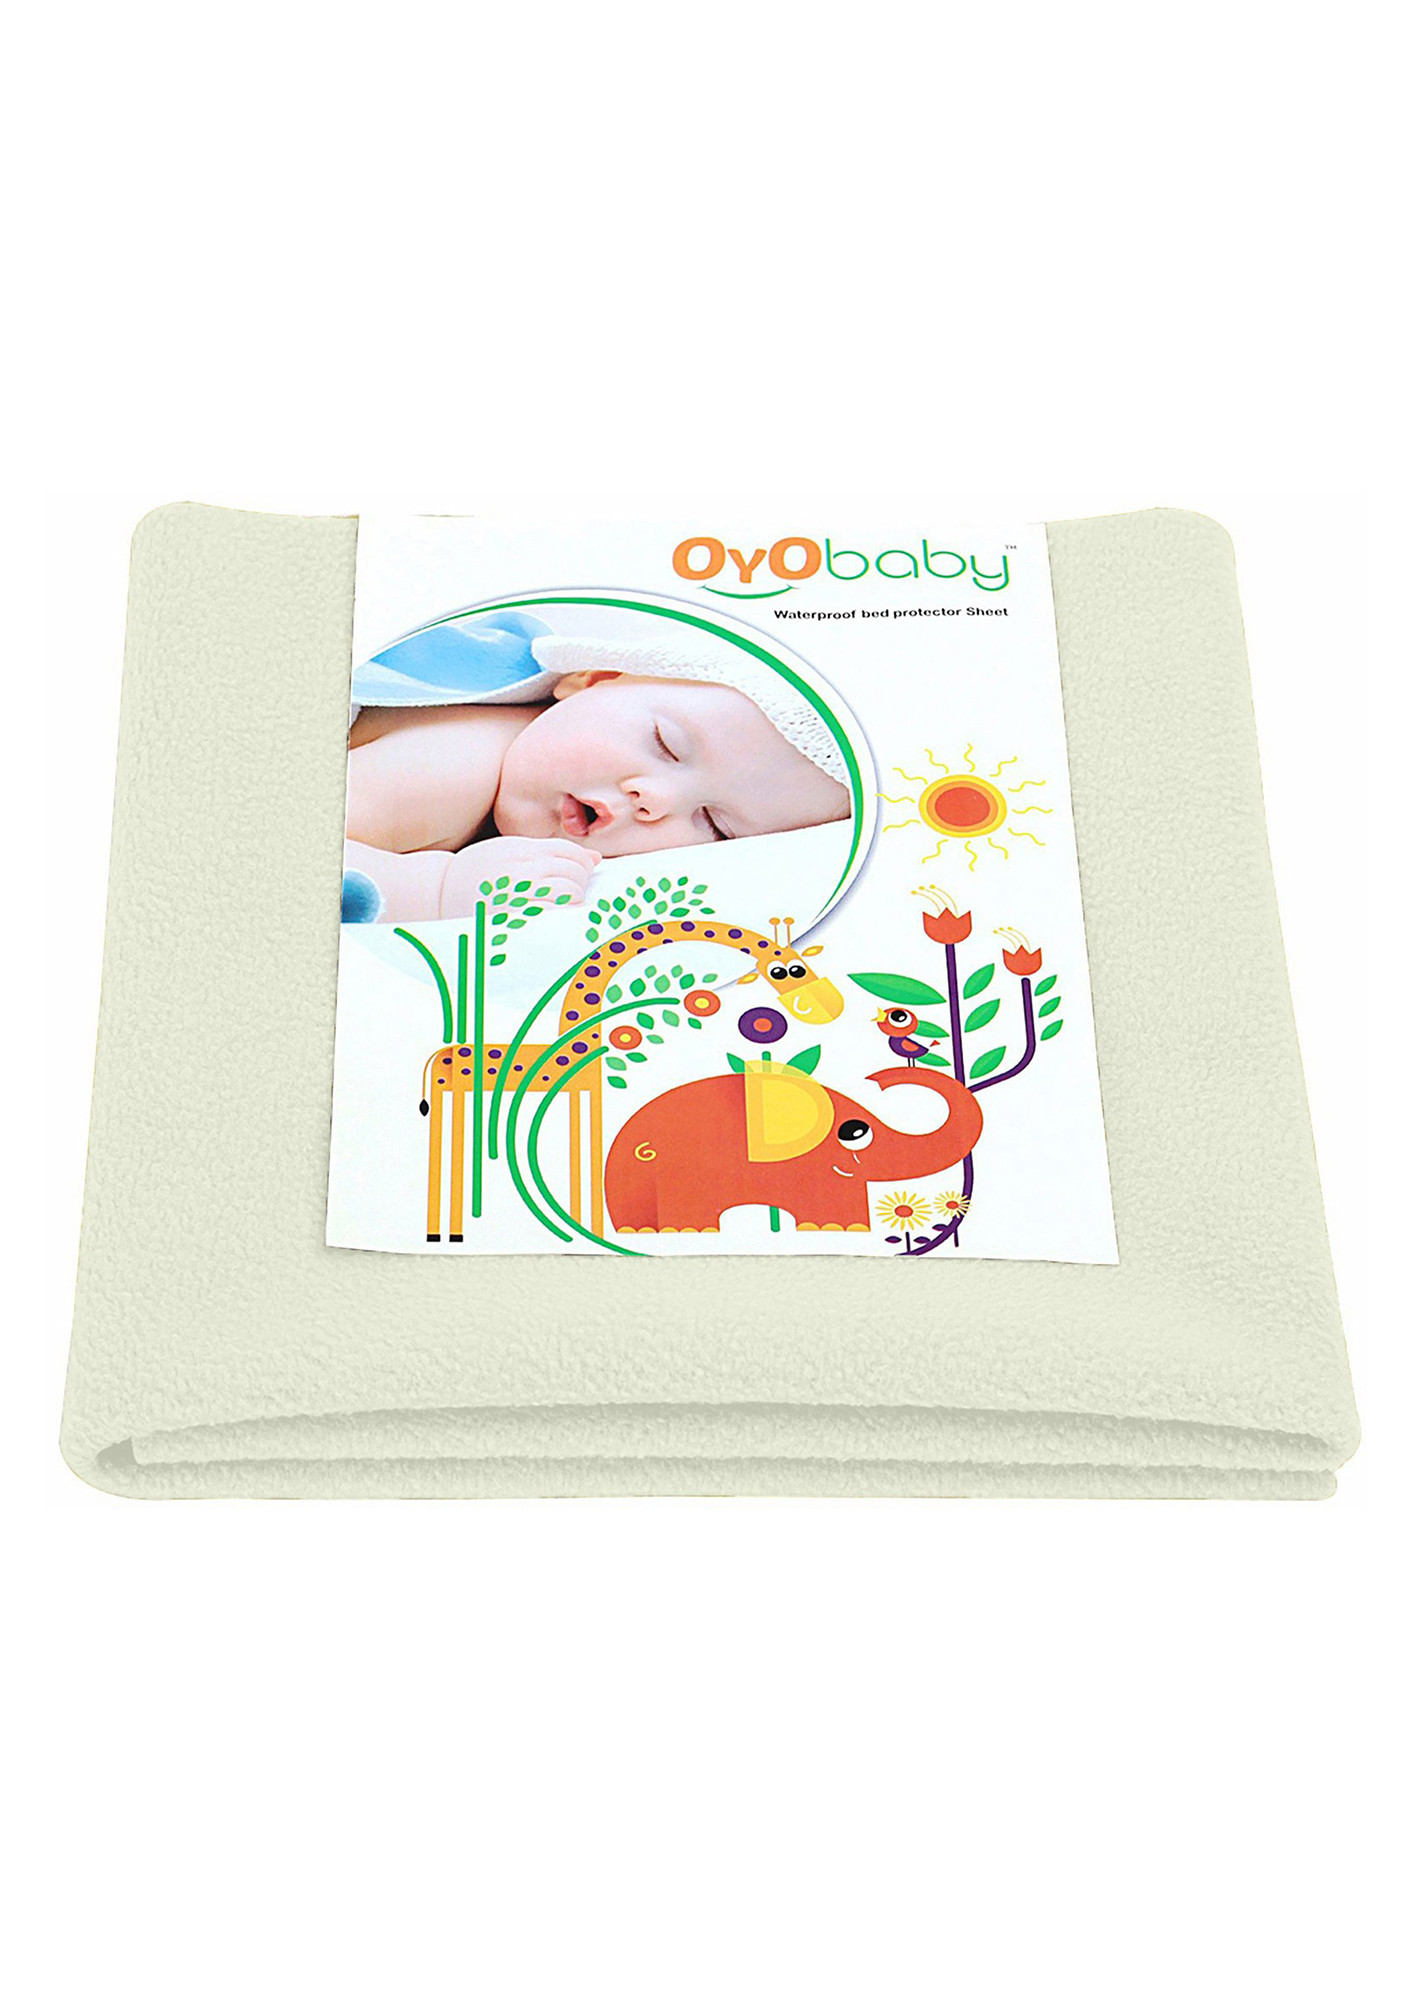 Oyo Baby Cotton Baby Bed Protecting Mat (Ivory, Large)-OB-2022-IV